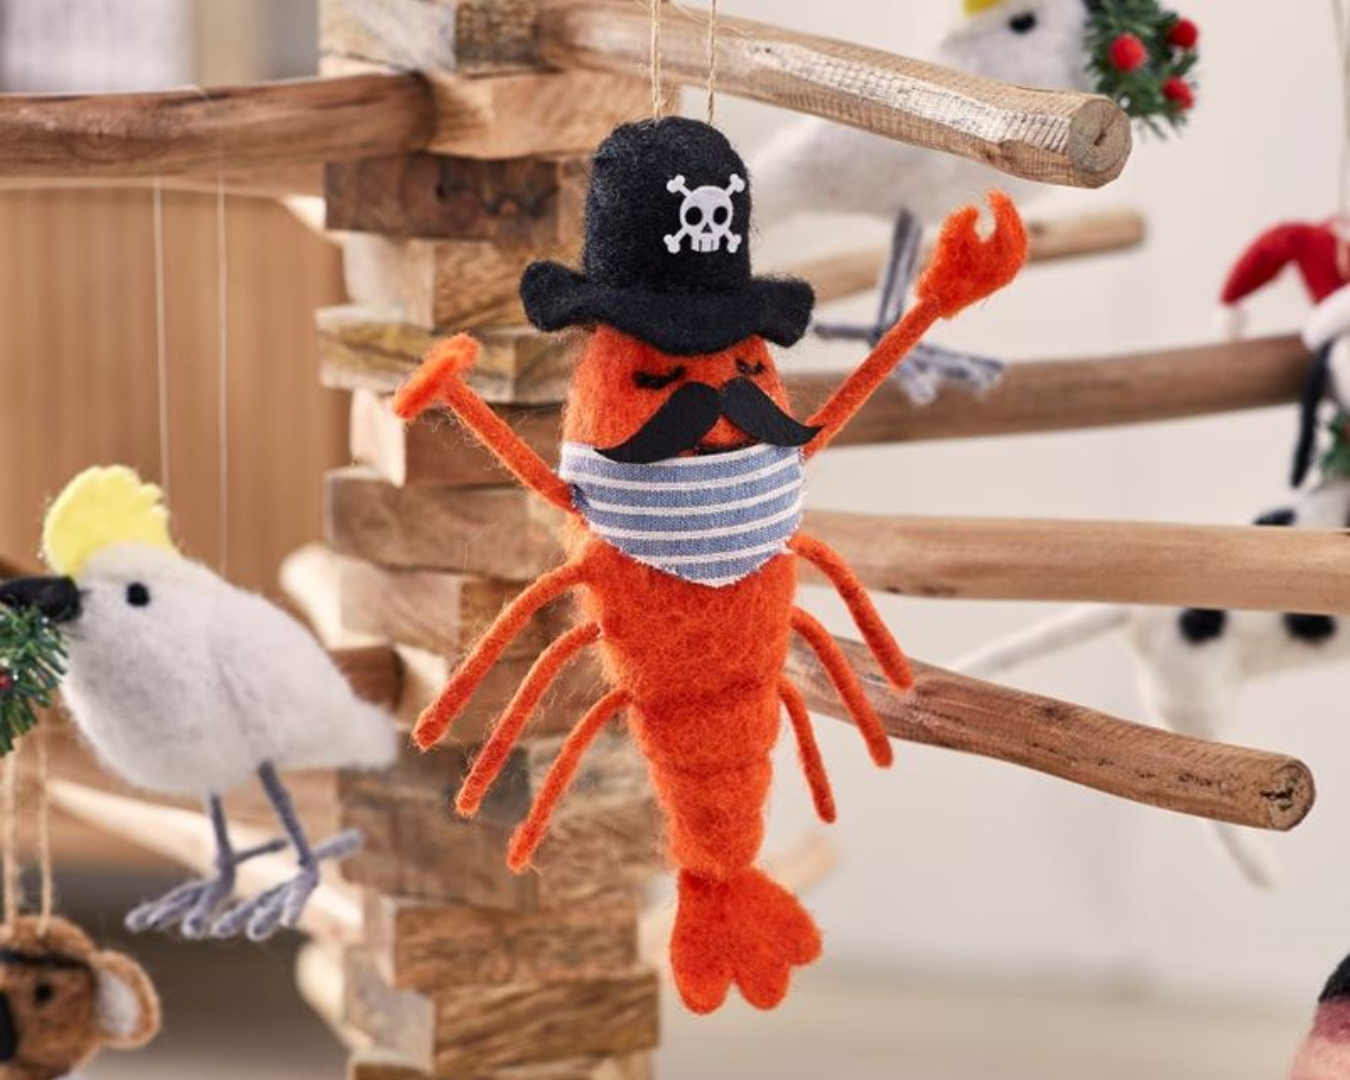 Adairs Felted Lobster Pirate Friend